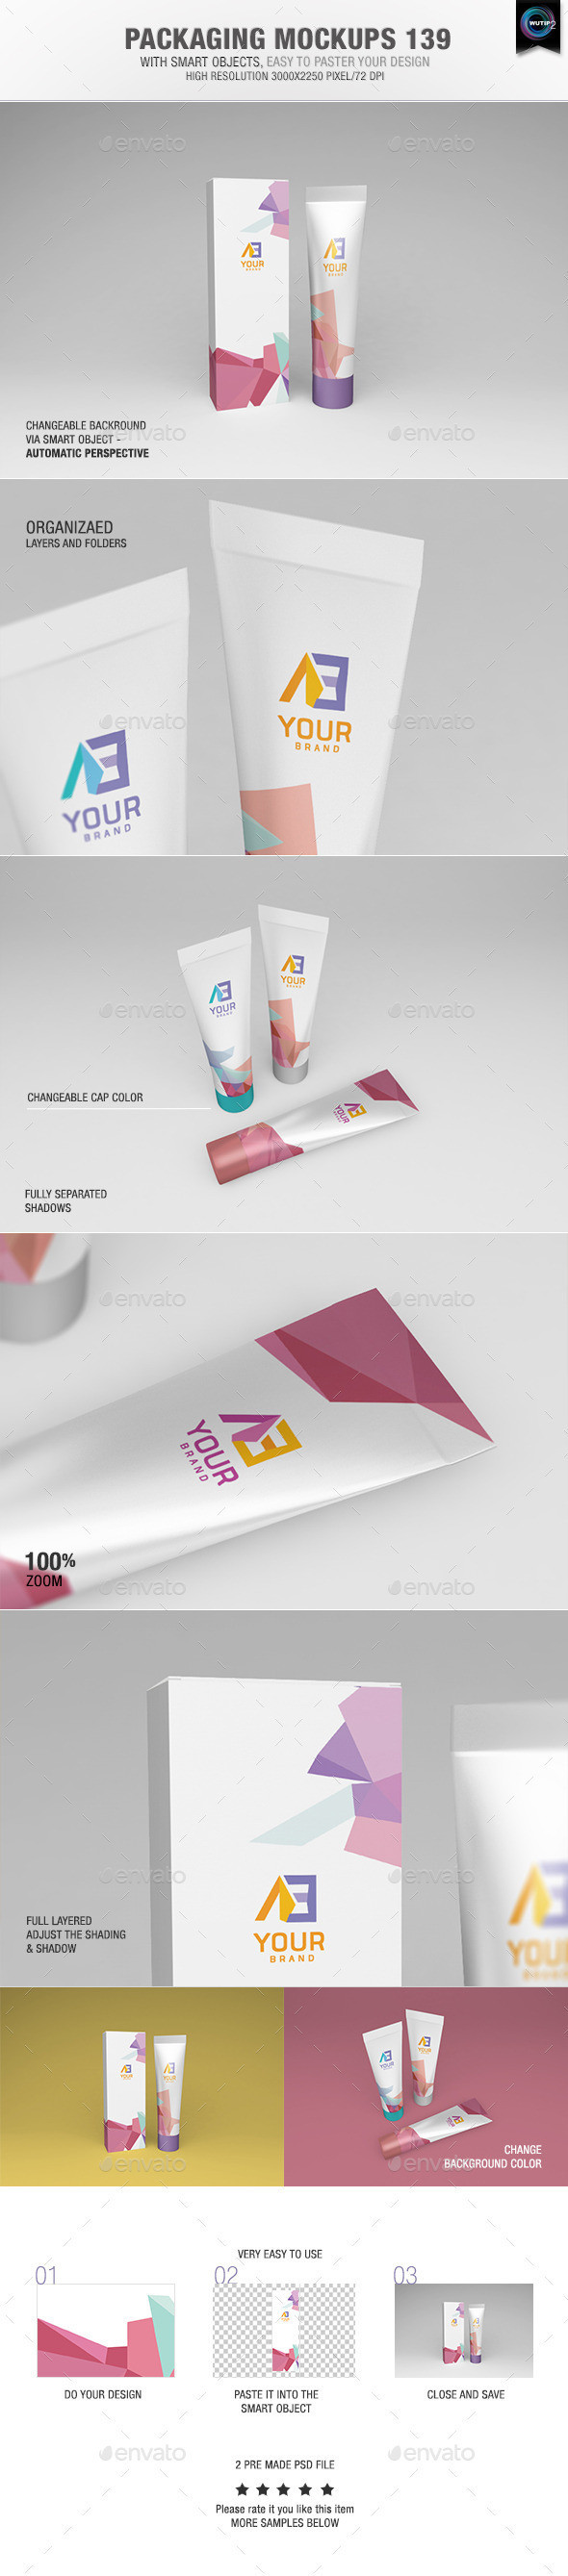 Packaging 20mockups 20139 20preview